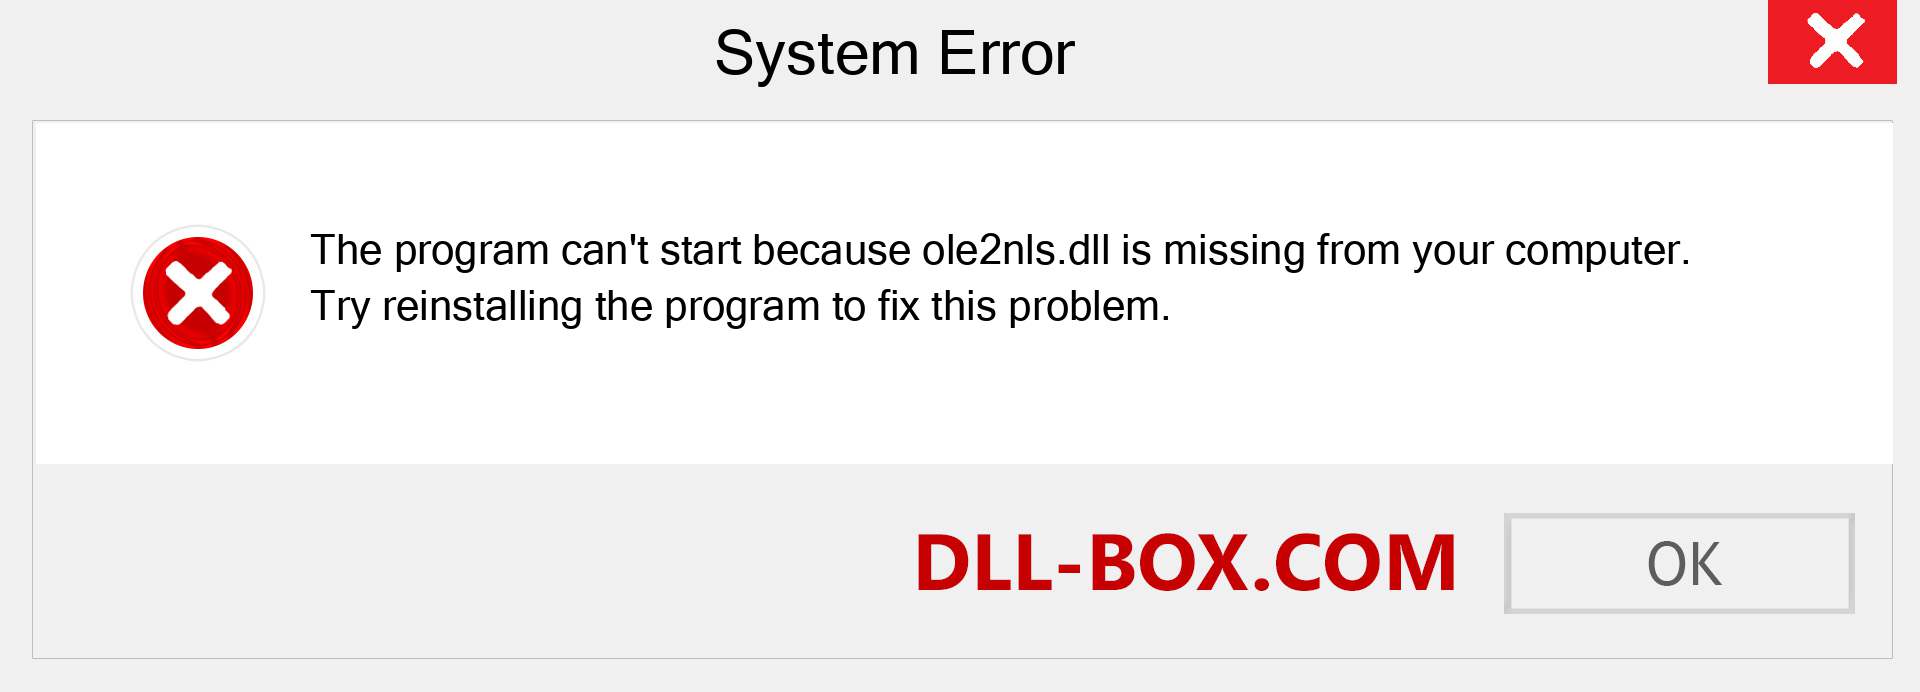  ole2nls.dll file is missing?. Download for Windows 7, 8, 10 - Fix  ole2nls dll Missing Error on Windows, photos, images